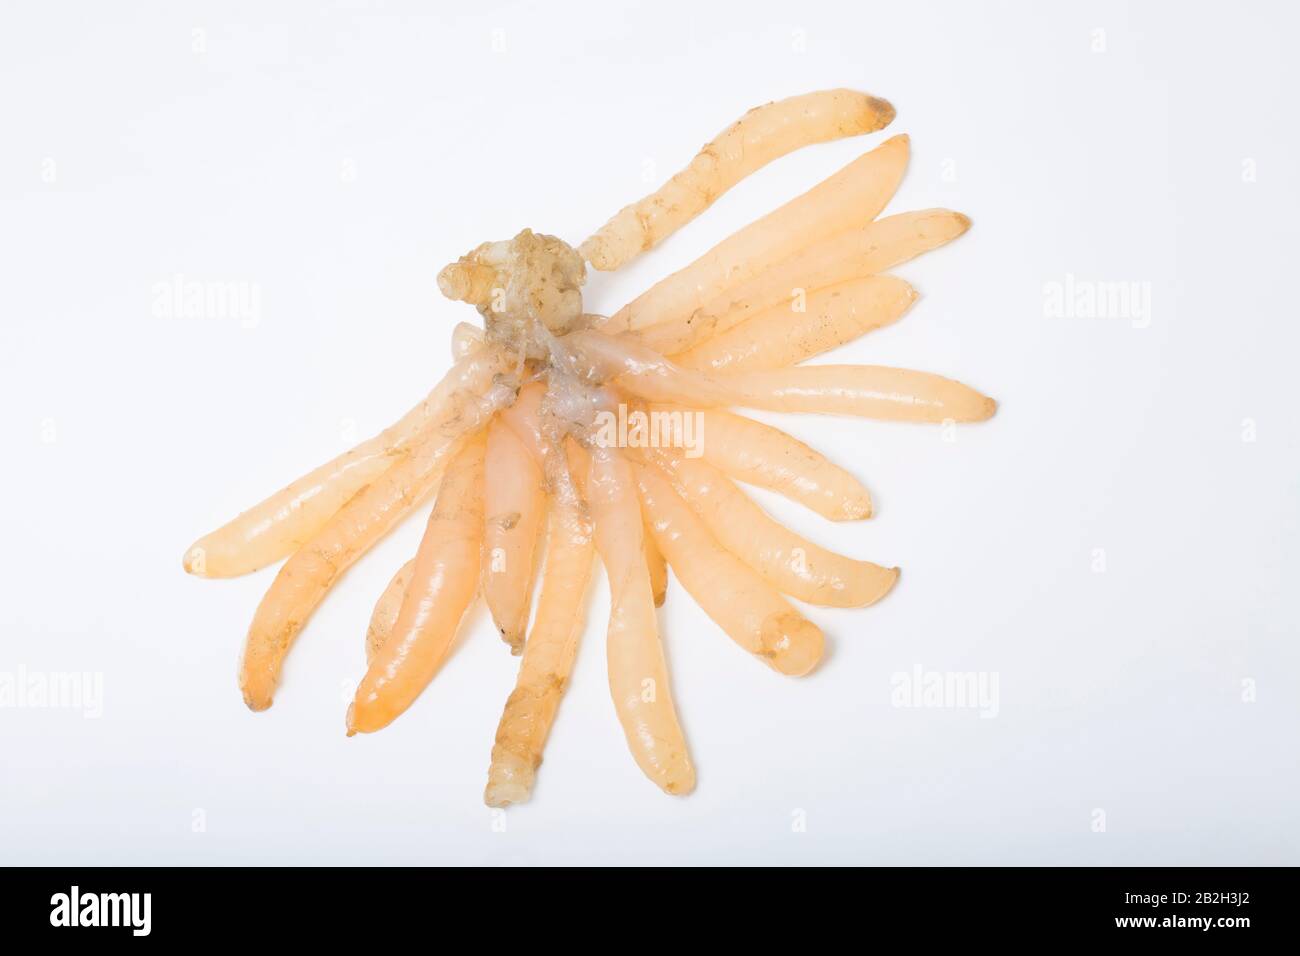 A clump of squid eggs found washed ashore while beachcombing on a sandy beach in Dorset. White background. Dorset England UK GB Stock Photo